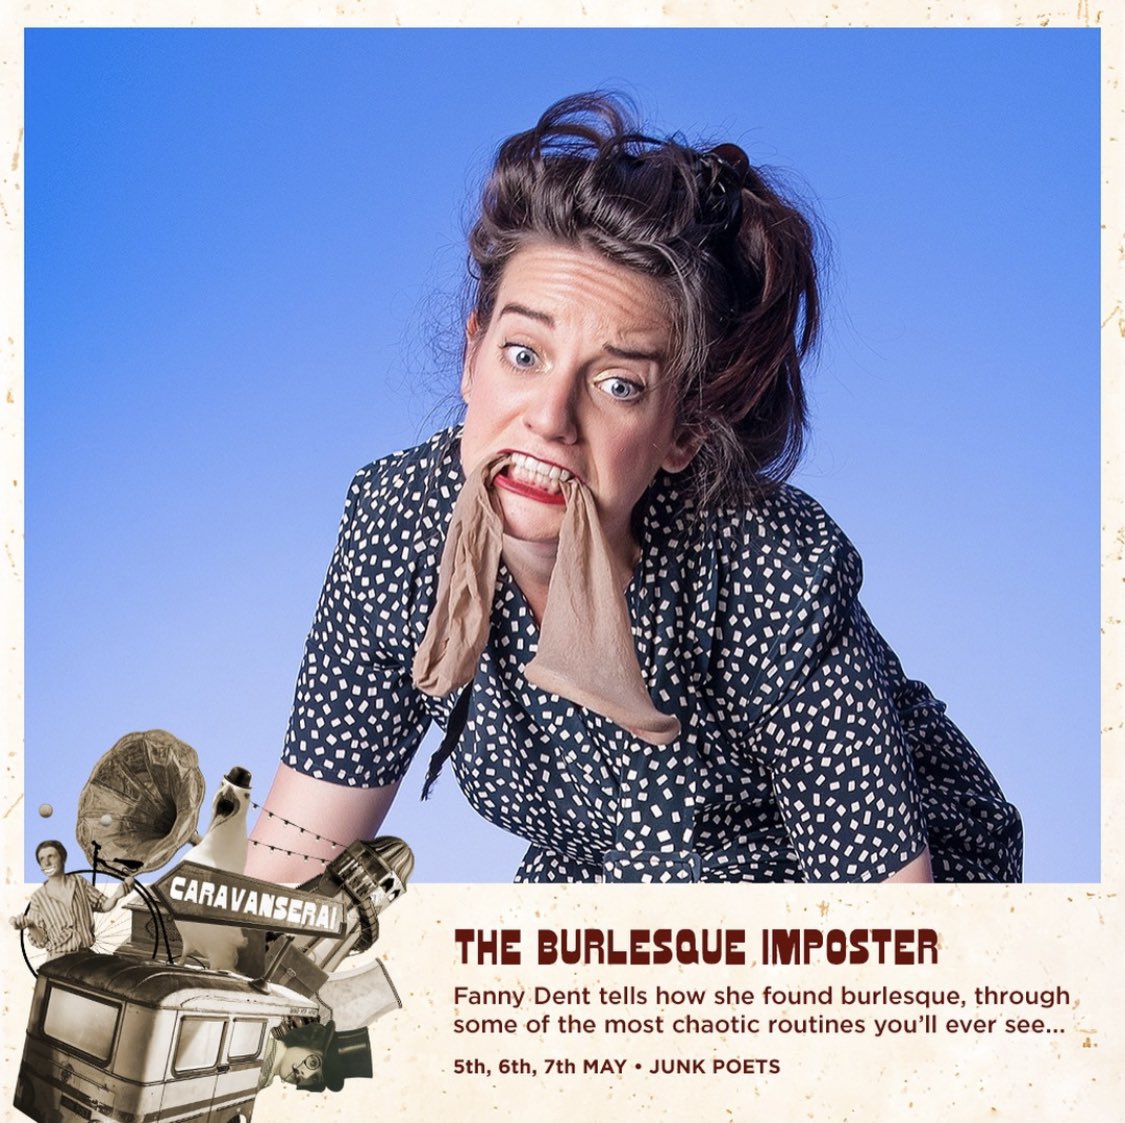 Yes, YES! The Burlesque Imposter opens @brightonfringe @CaravanseraiBTN next weekend 🎉 Advance booking recommended! brightonfringe.org/events/the-bur… #brightonfringe #brightonburlesque #cabaret #comedy #burlesque #femalevoices #feminist #BankHolidayWeekend #BankHoliday